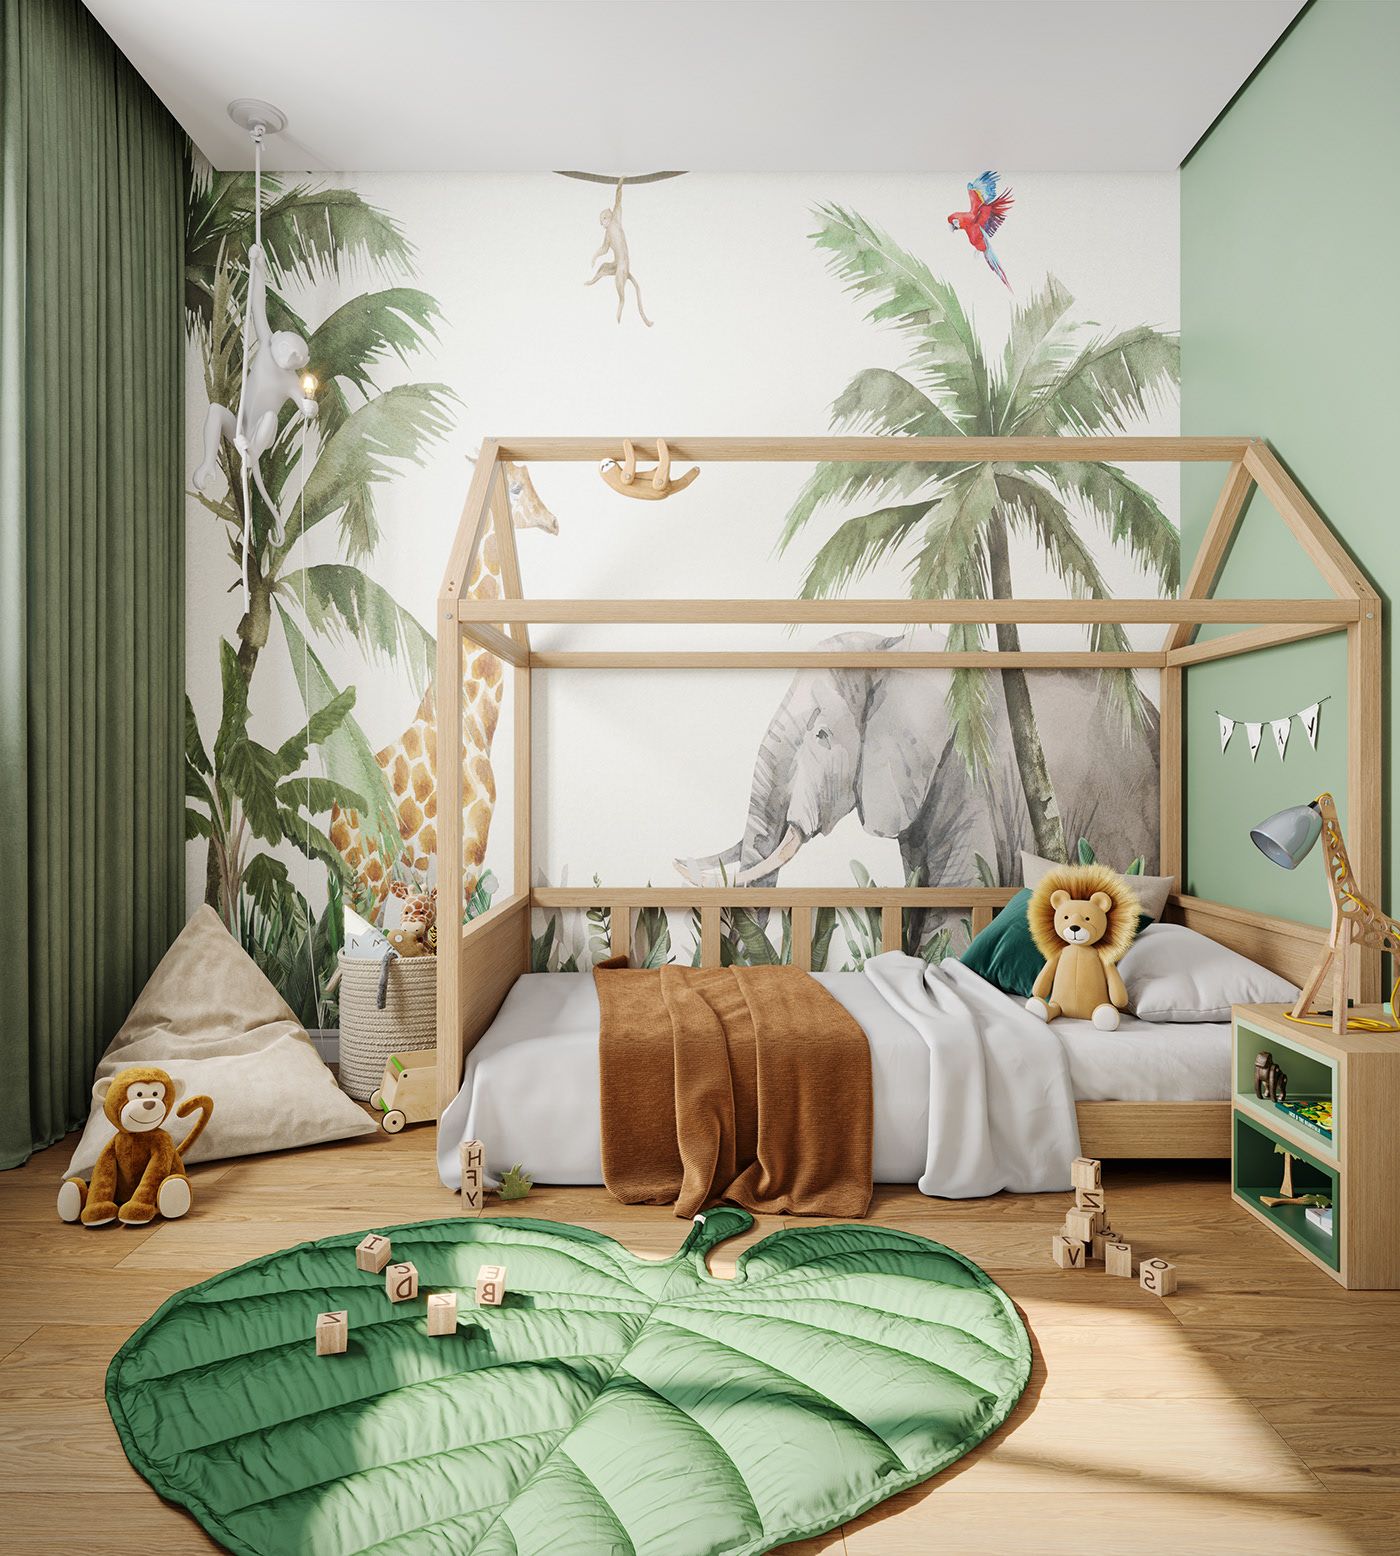 Make your kids bedroom perfect by
following children bedroom ideas